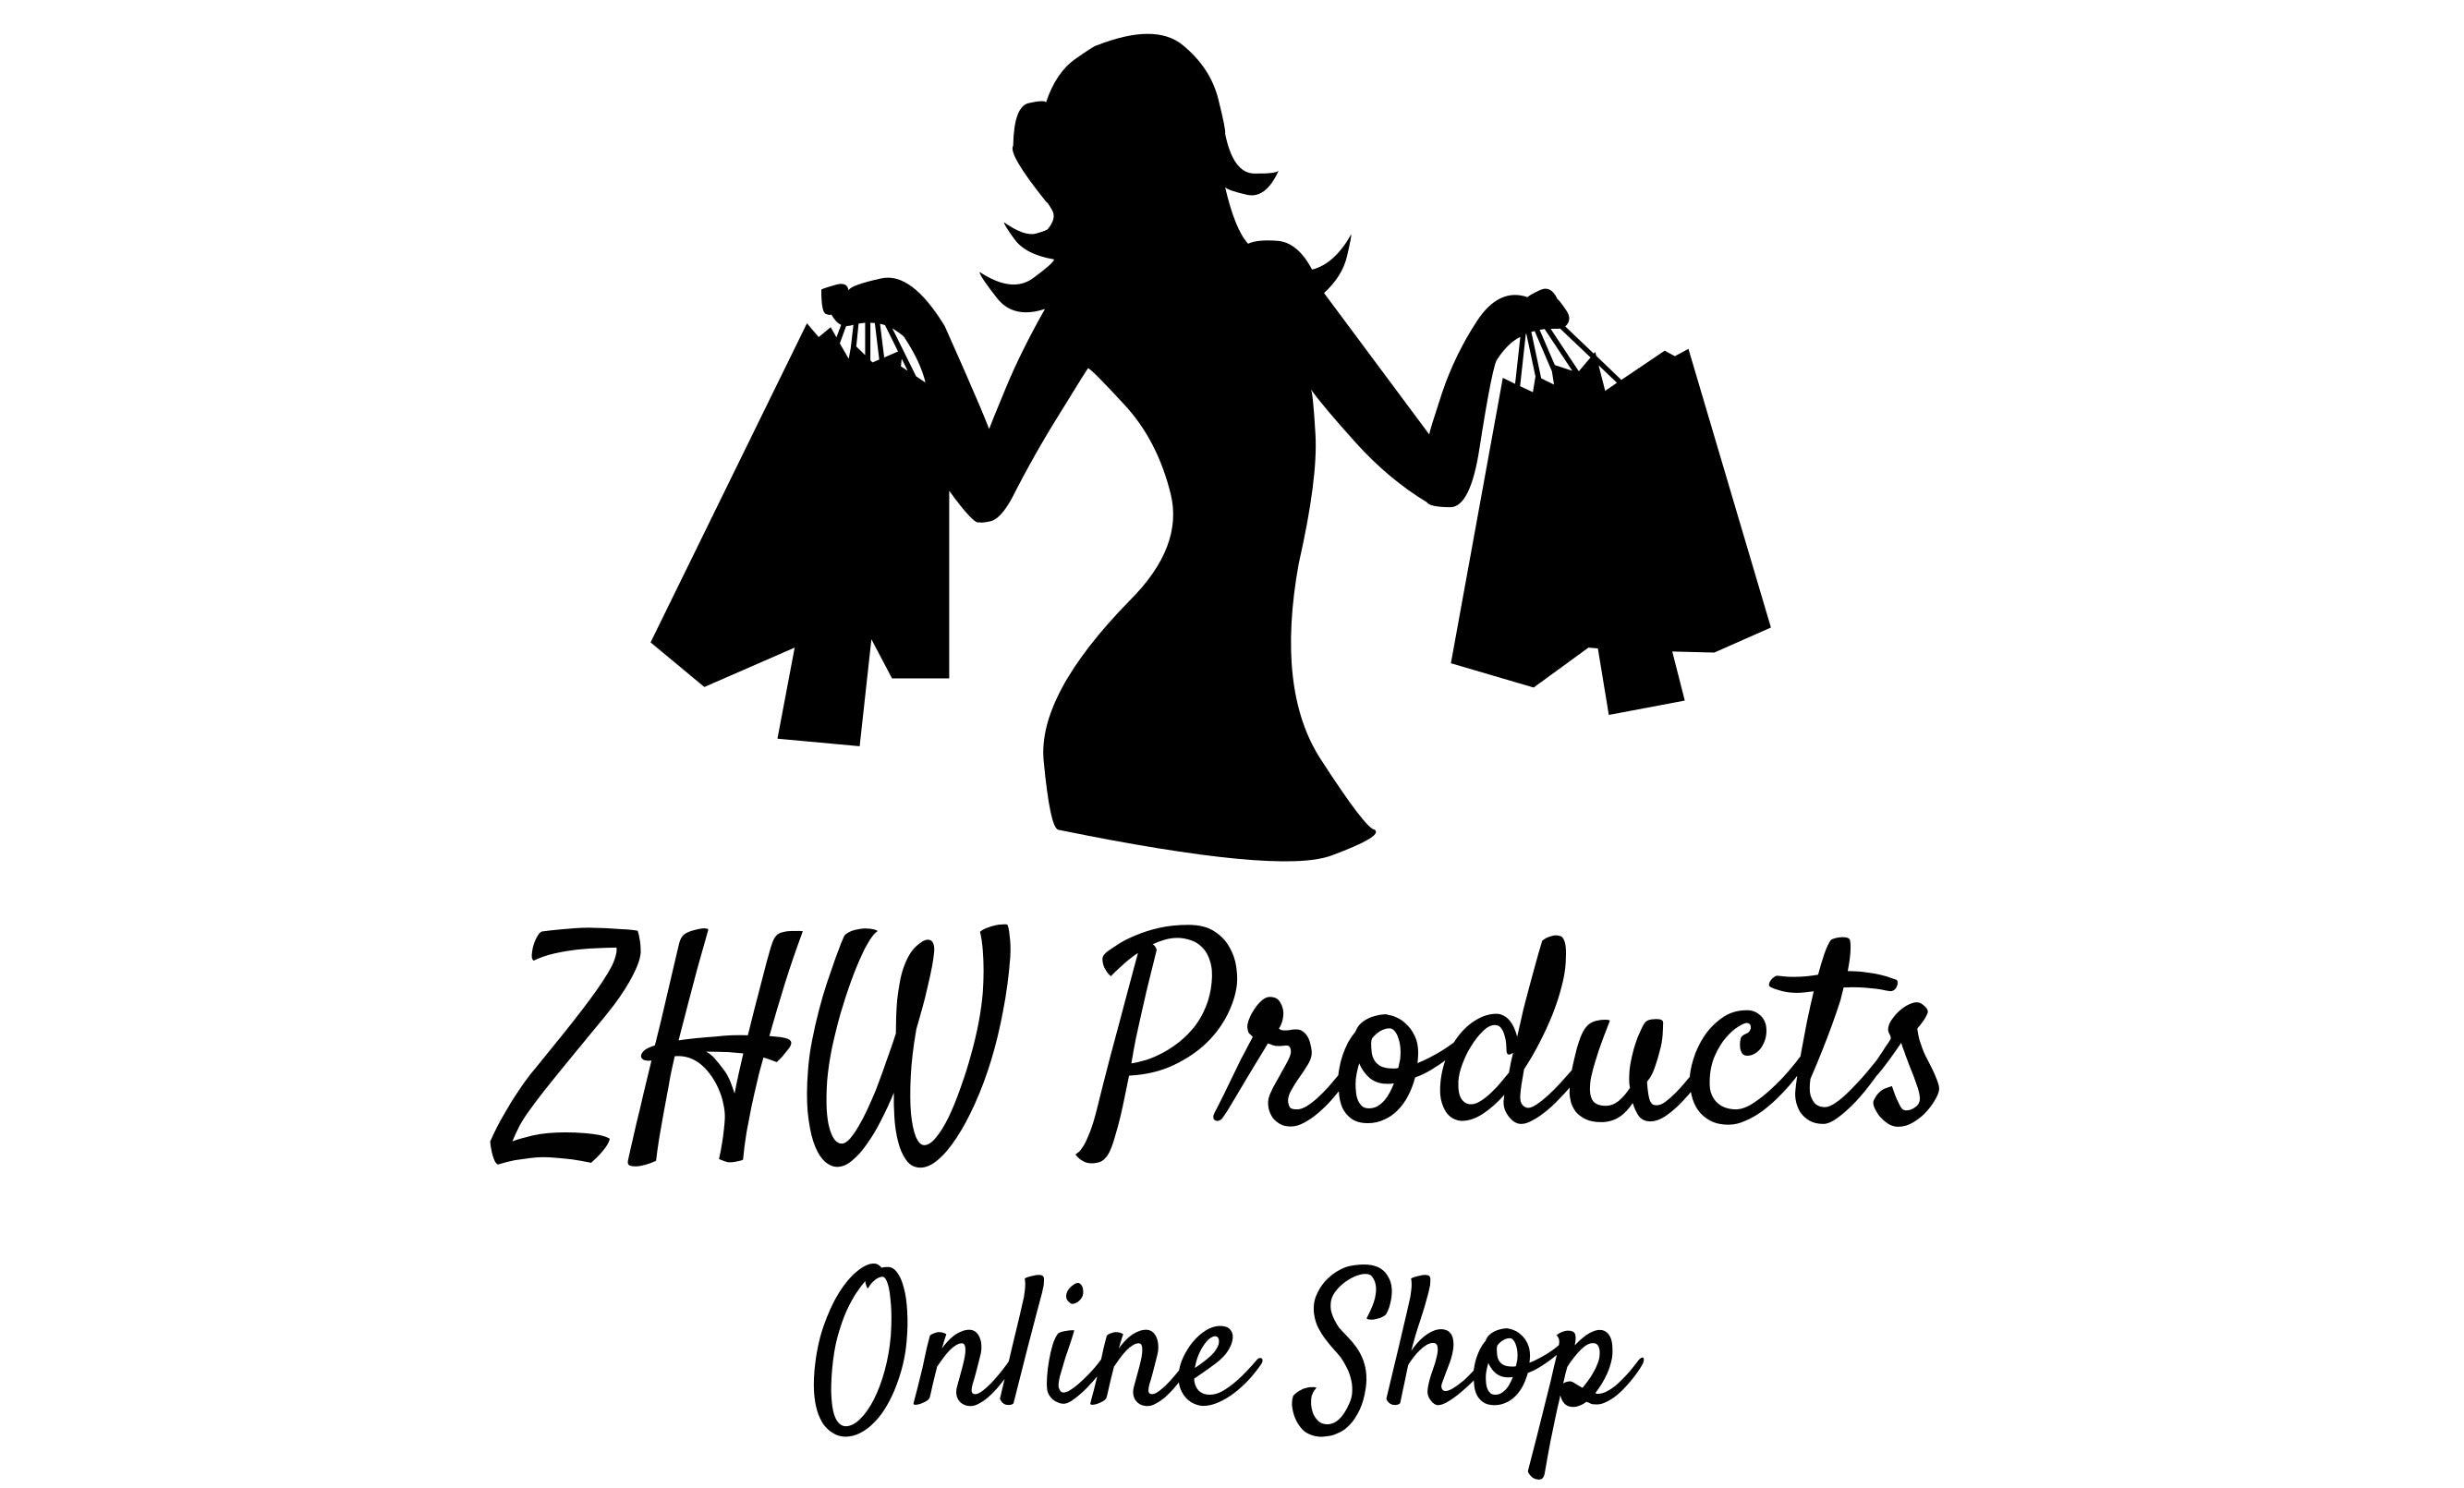 ZHW Products